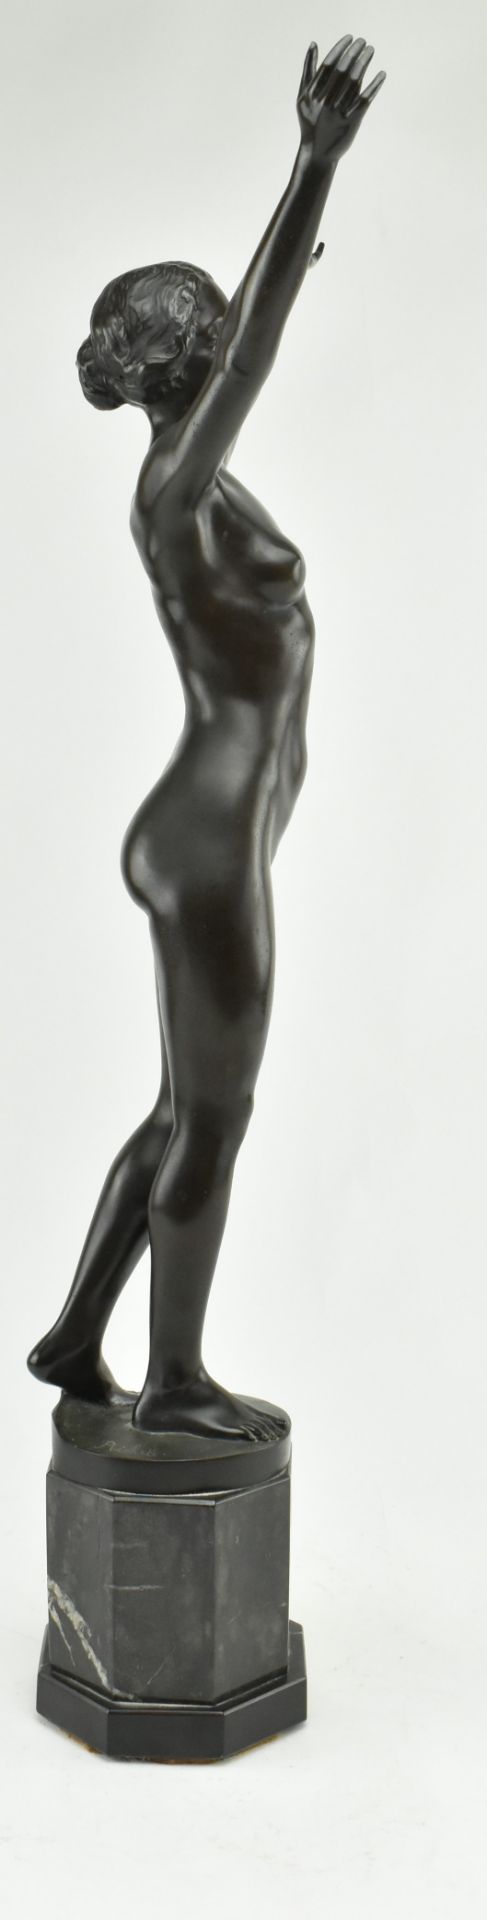 AFTER PAUL AICHELE (1859-1920) - BRONZE SCULPTURE OF LADY - Image 5 of 7